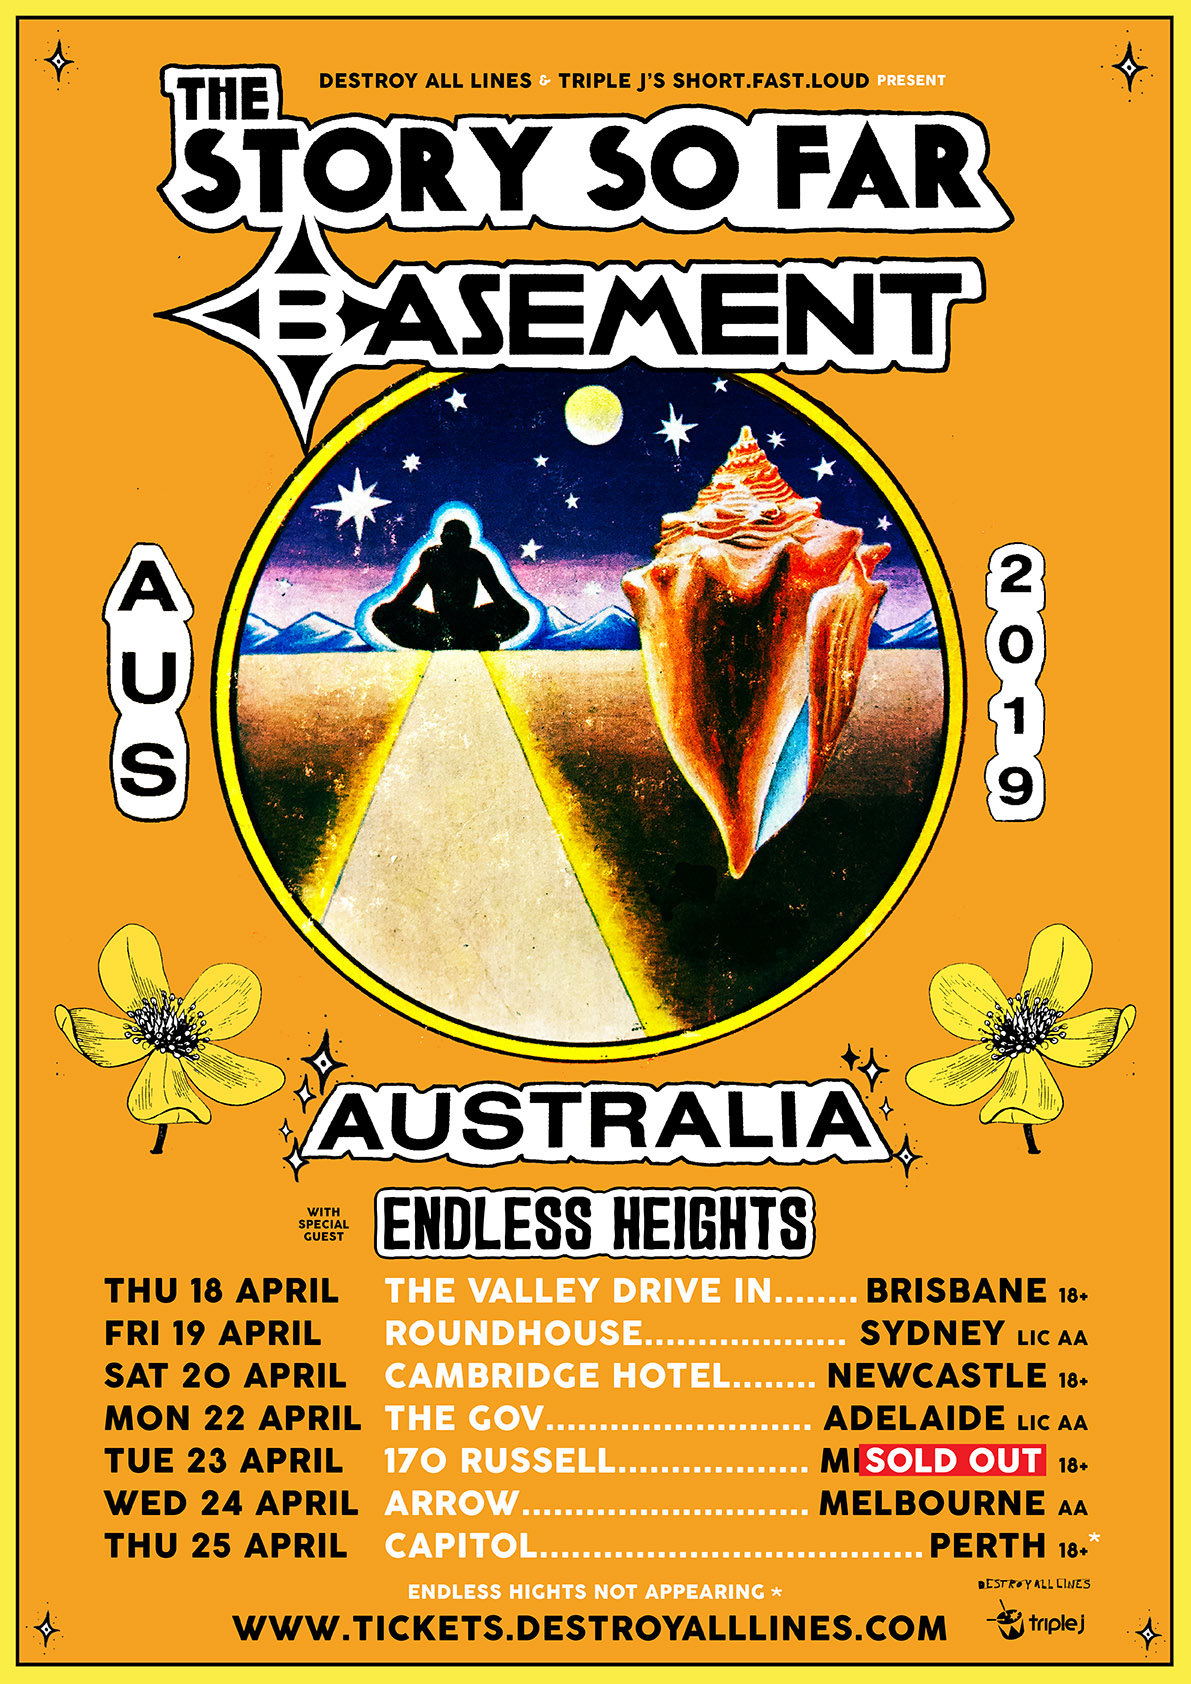 THE STORY SO FAR &  BASEMENT ADD ENDLESS HEIGHTS TO AUSTRALIAN NATIONAL TOUR